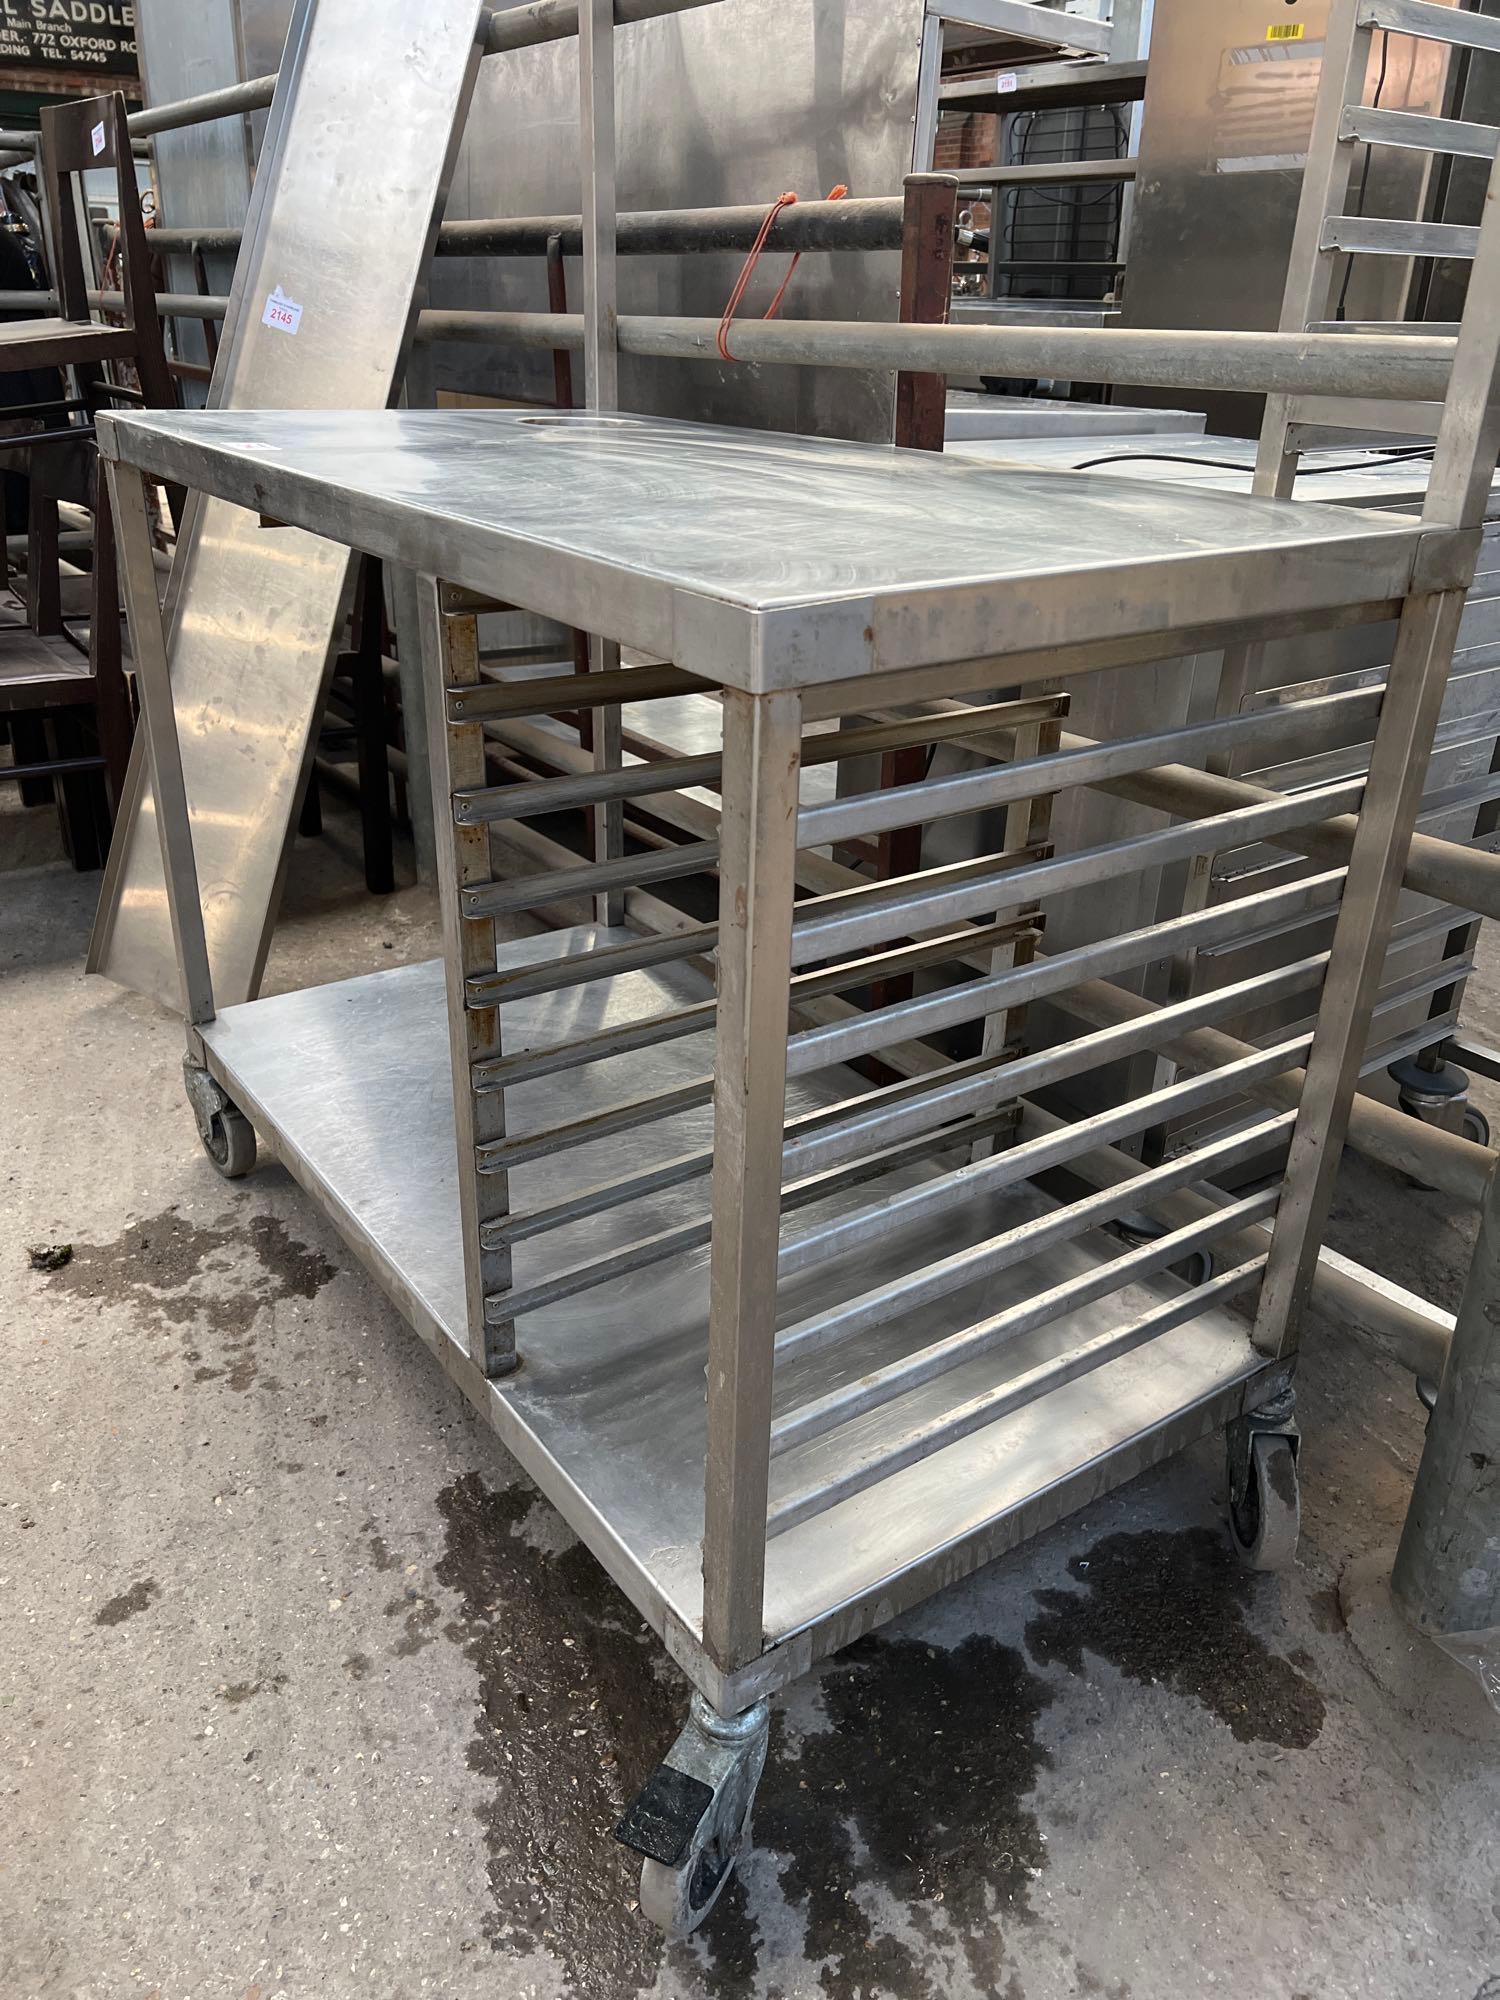 Moffat mobile stainless steel counter table with over shelf - Image 2 of 3